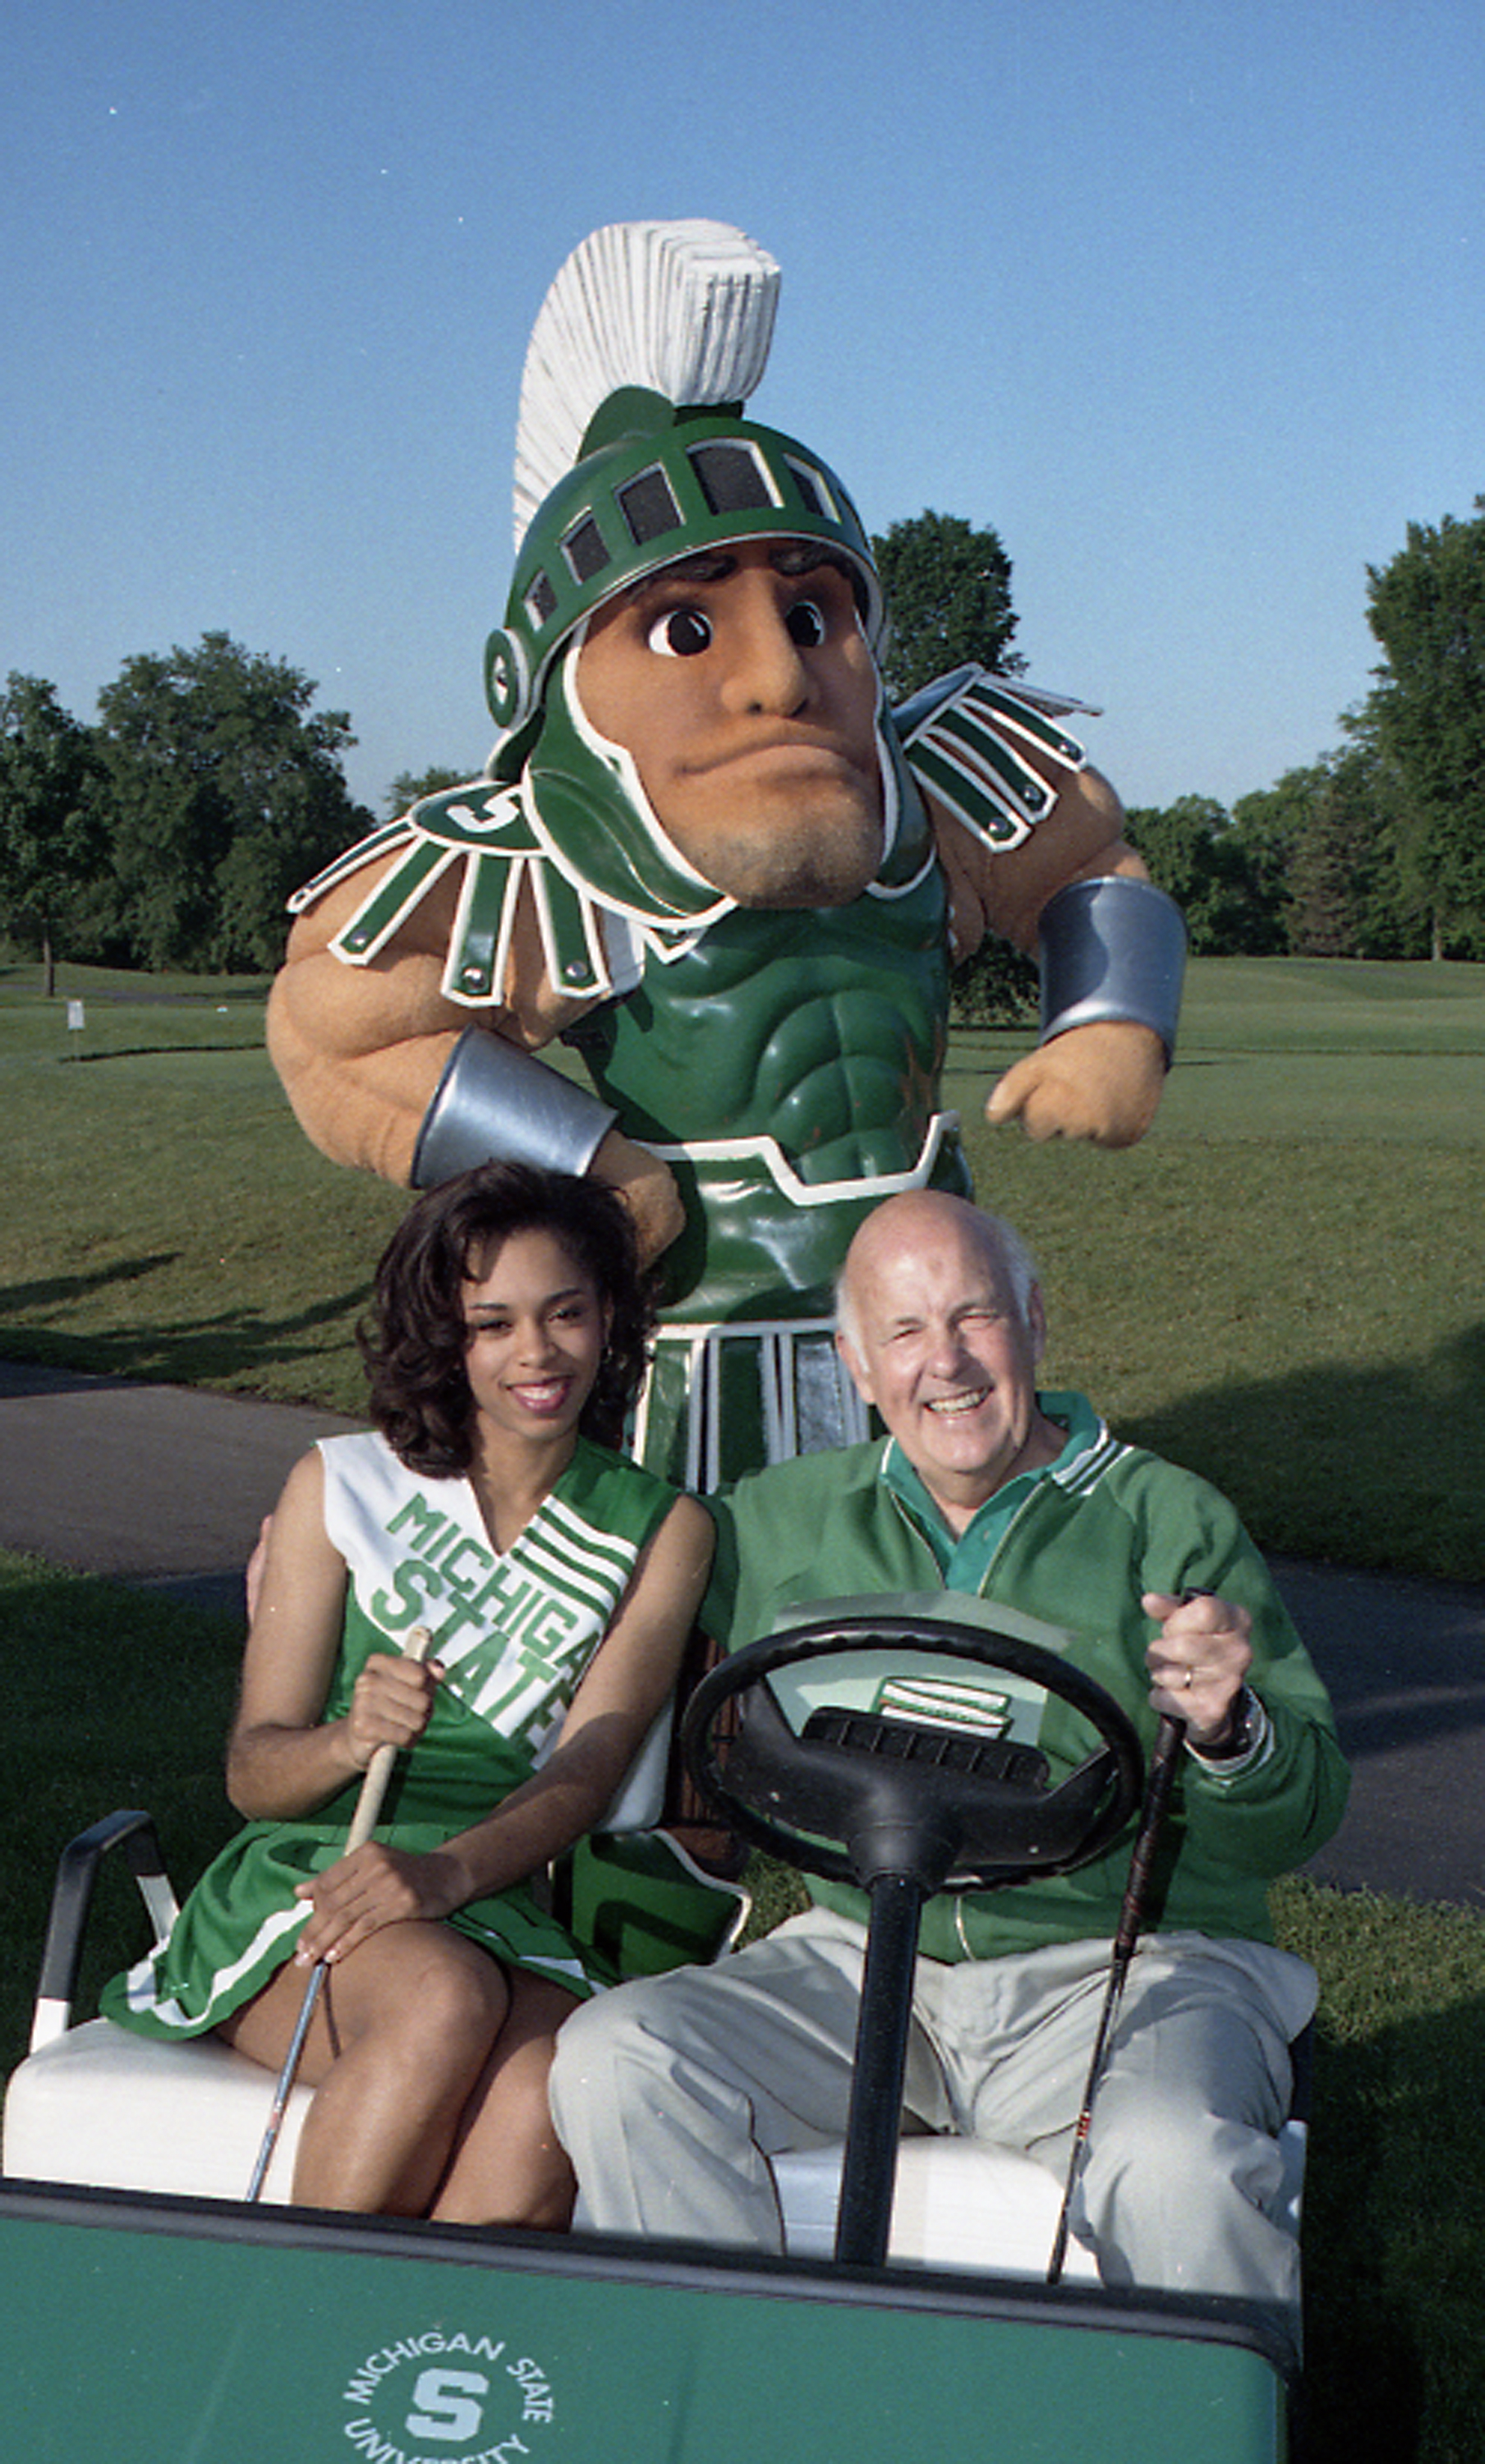 Guyer poses with Sparty and a student during a golf outing.